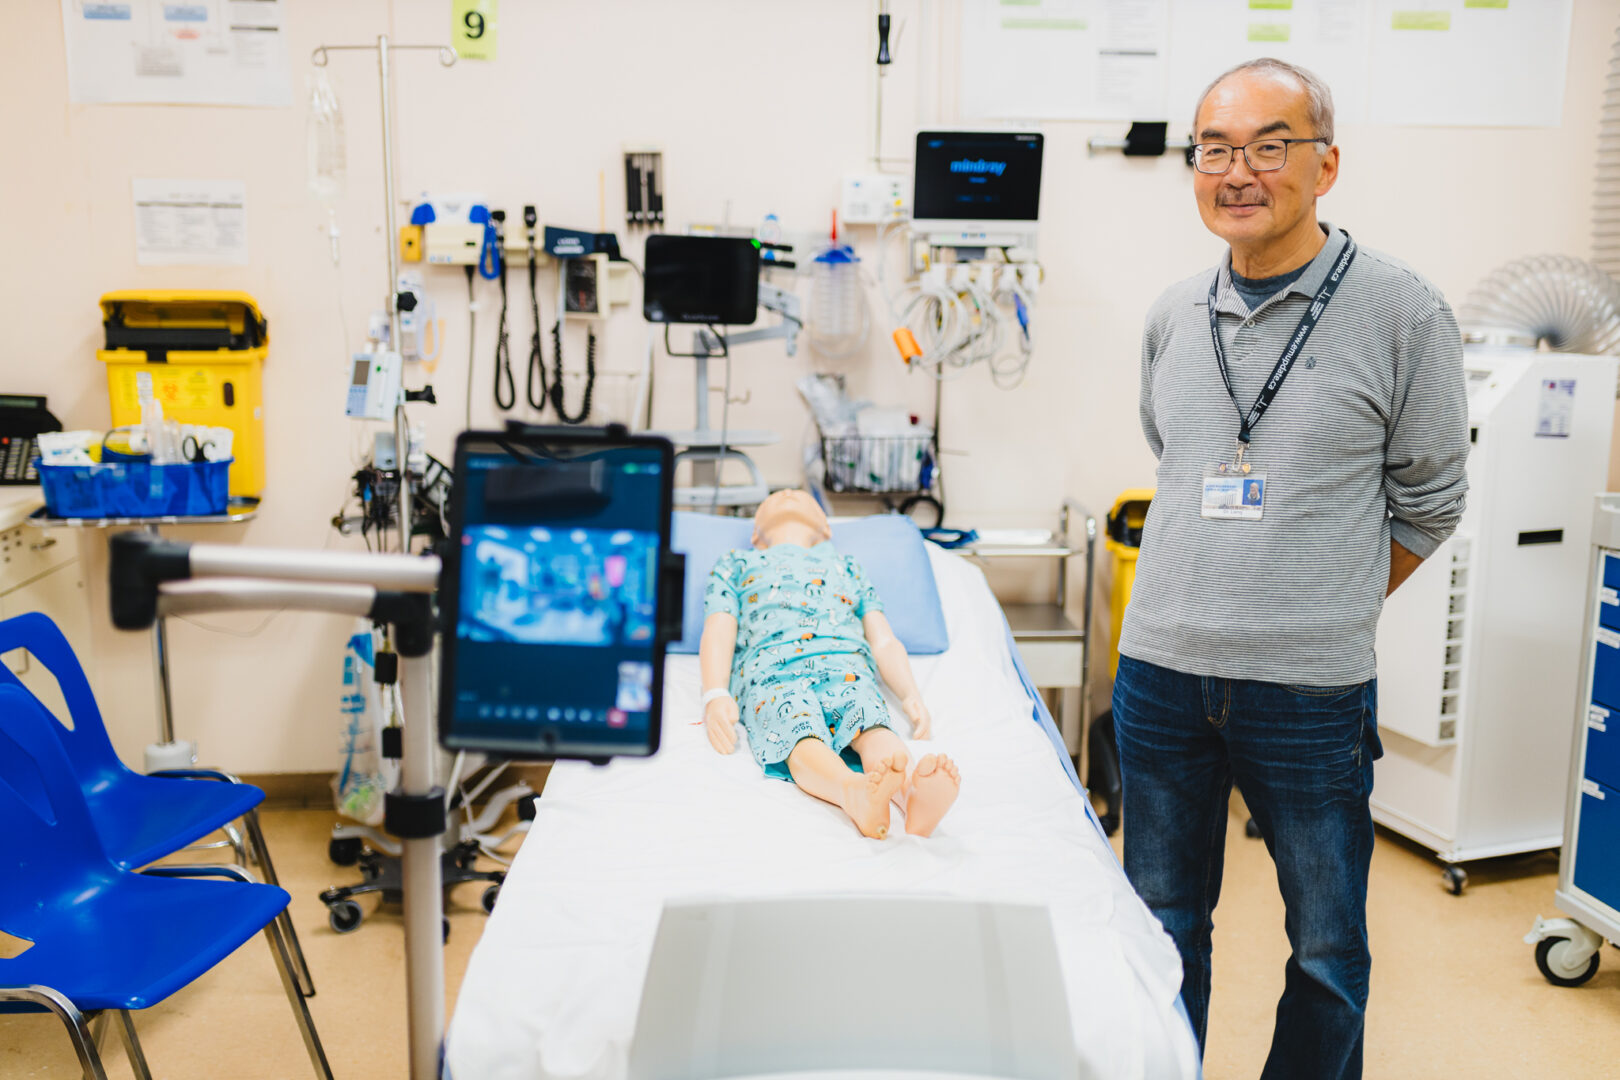 Dr. William Liang stands beside a mannequin on a hospital bed. In the foreground is an iPad on a stand, set up with video chat with the mock patient and doctor on the screen.